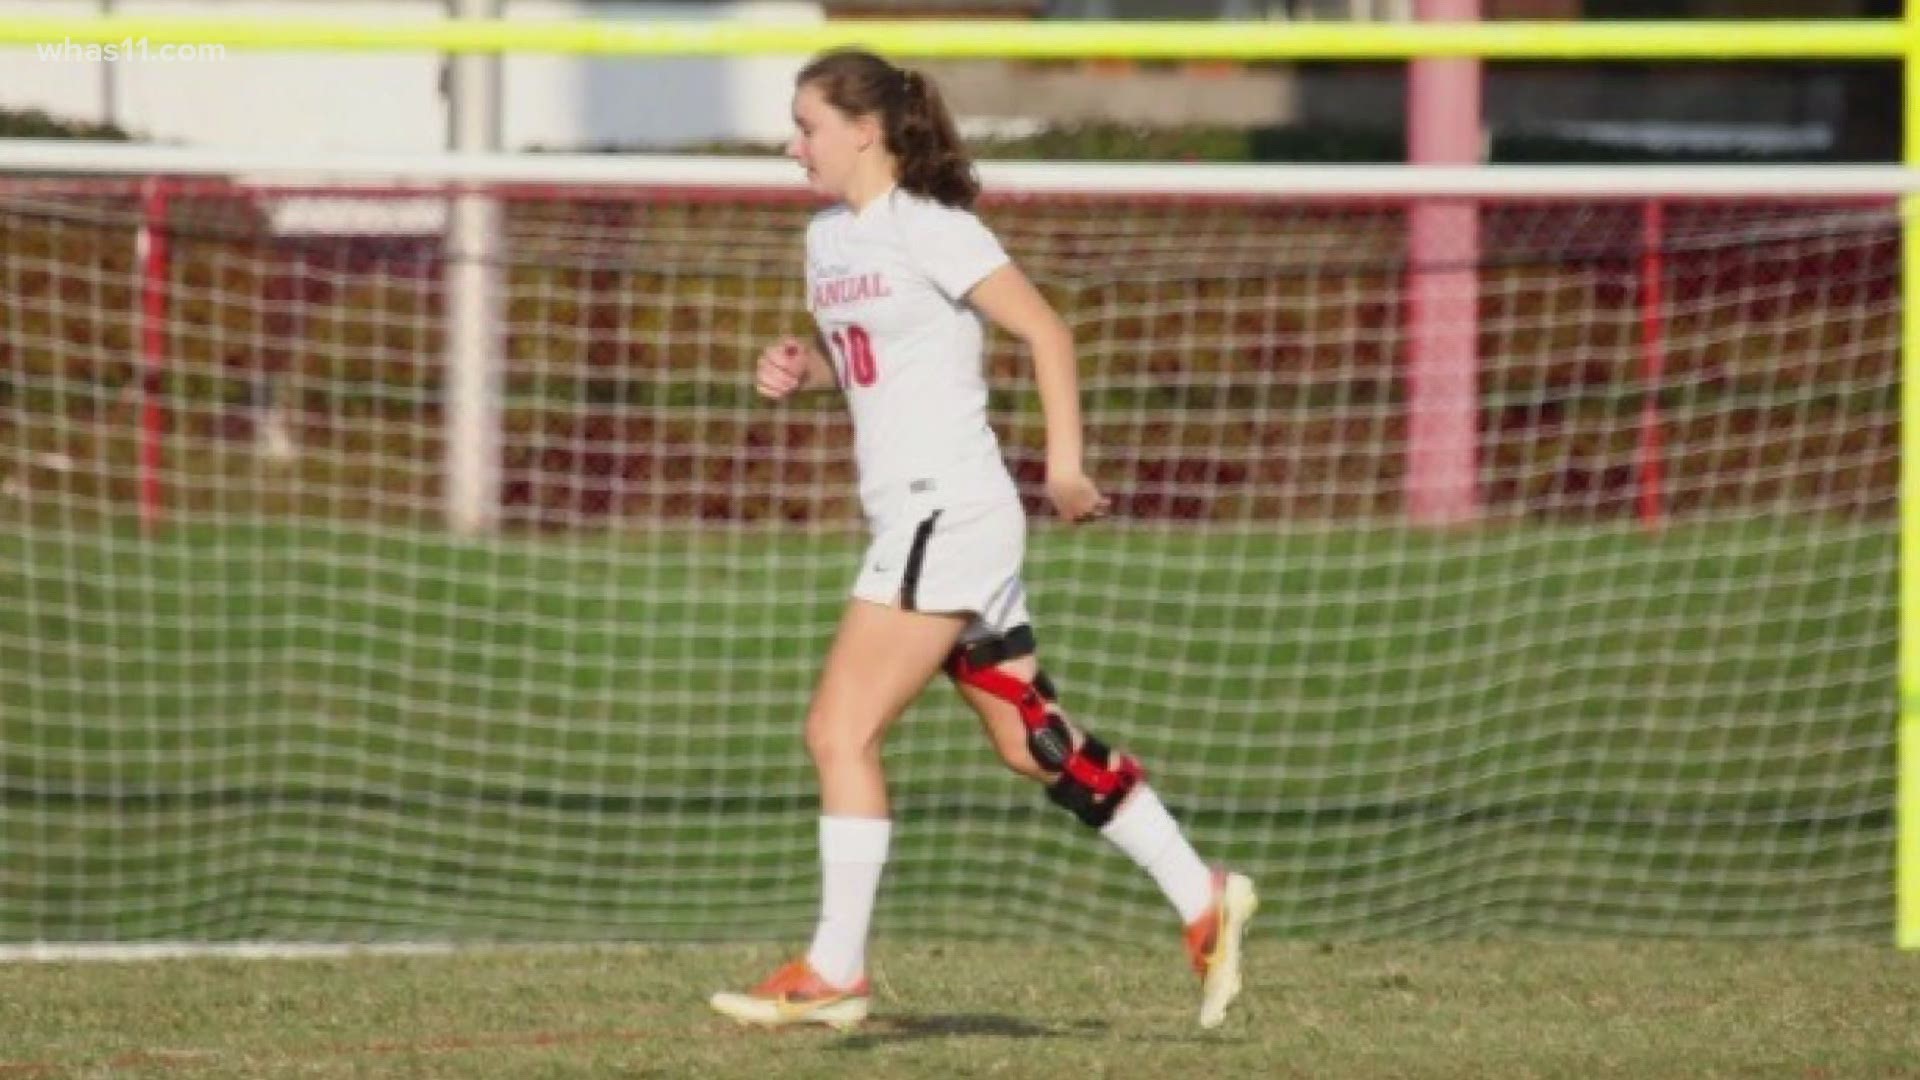 Emina Ekic is a former duPont Manual High School and University of Louisville star and was the fifth overall pick in the 2021 NWSL Draft.